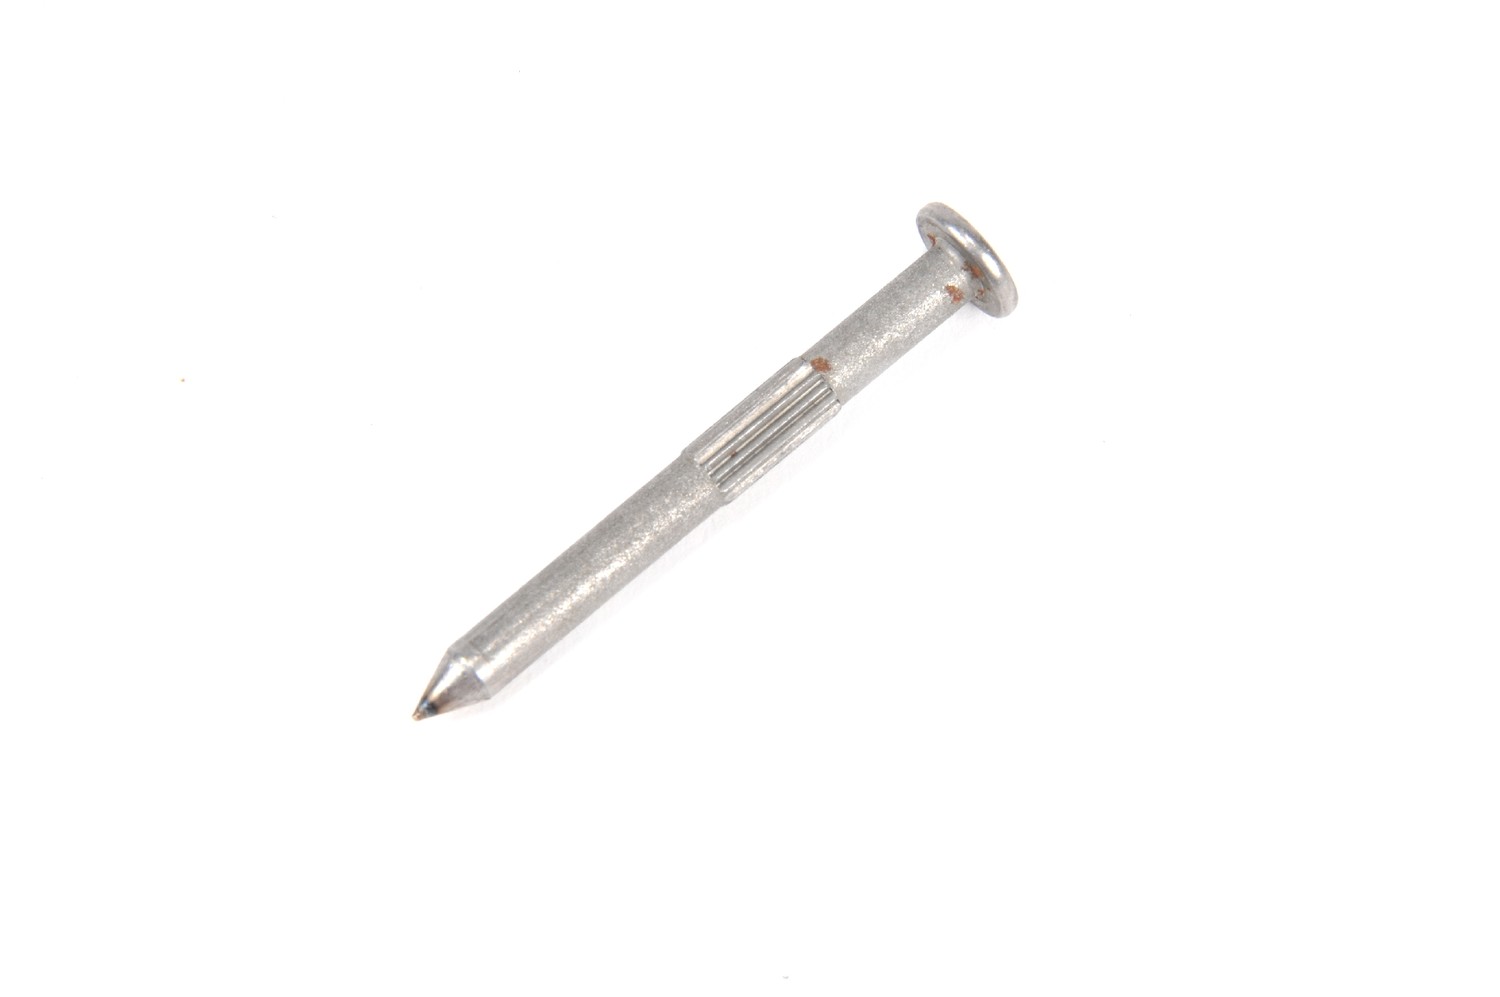 GM GENUINE PARTS - Automatic Transmission Manual Shift Shaft Pin - GMP 08682031